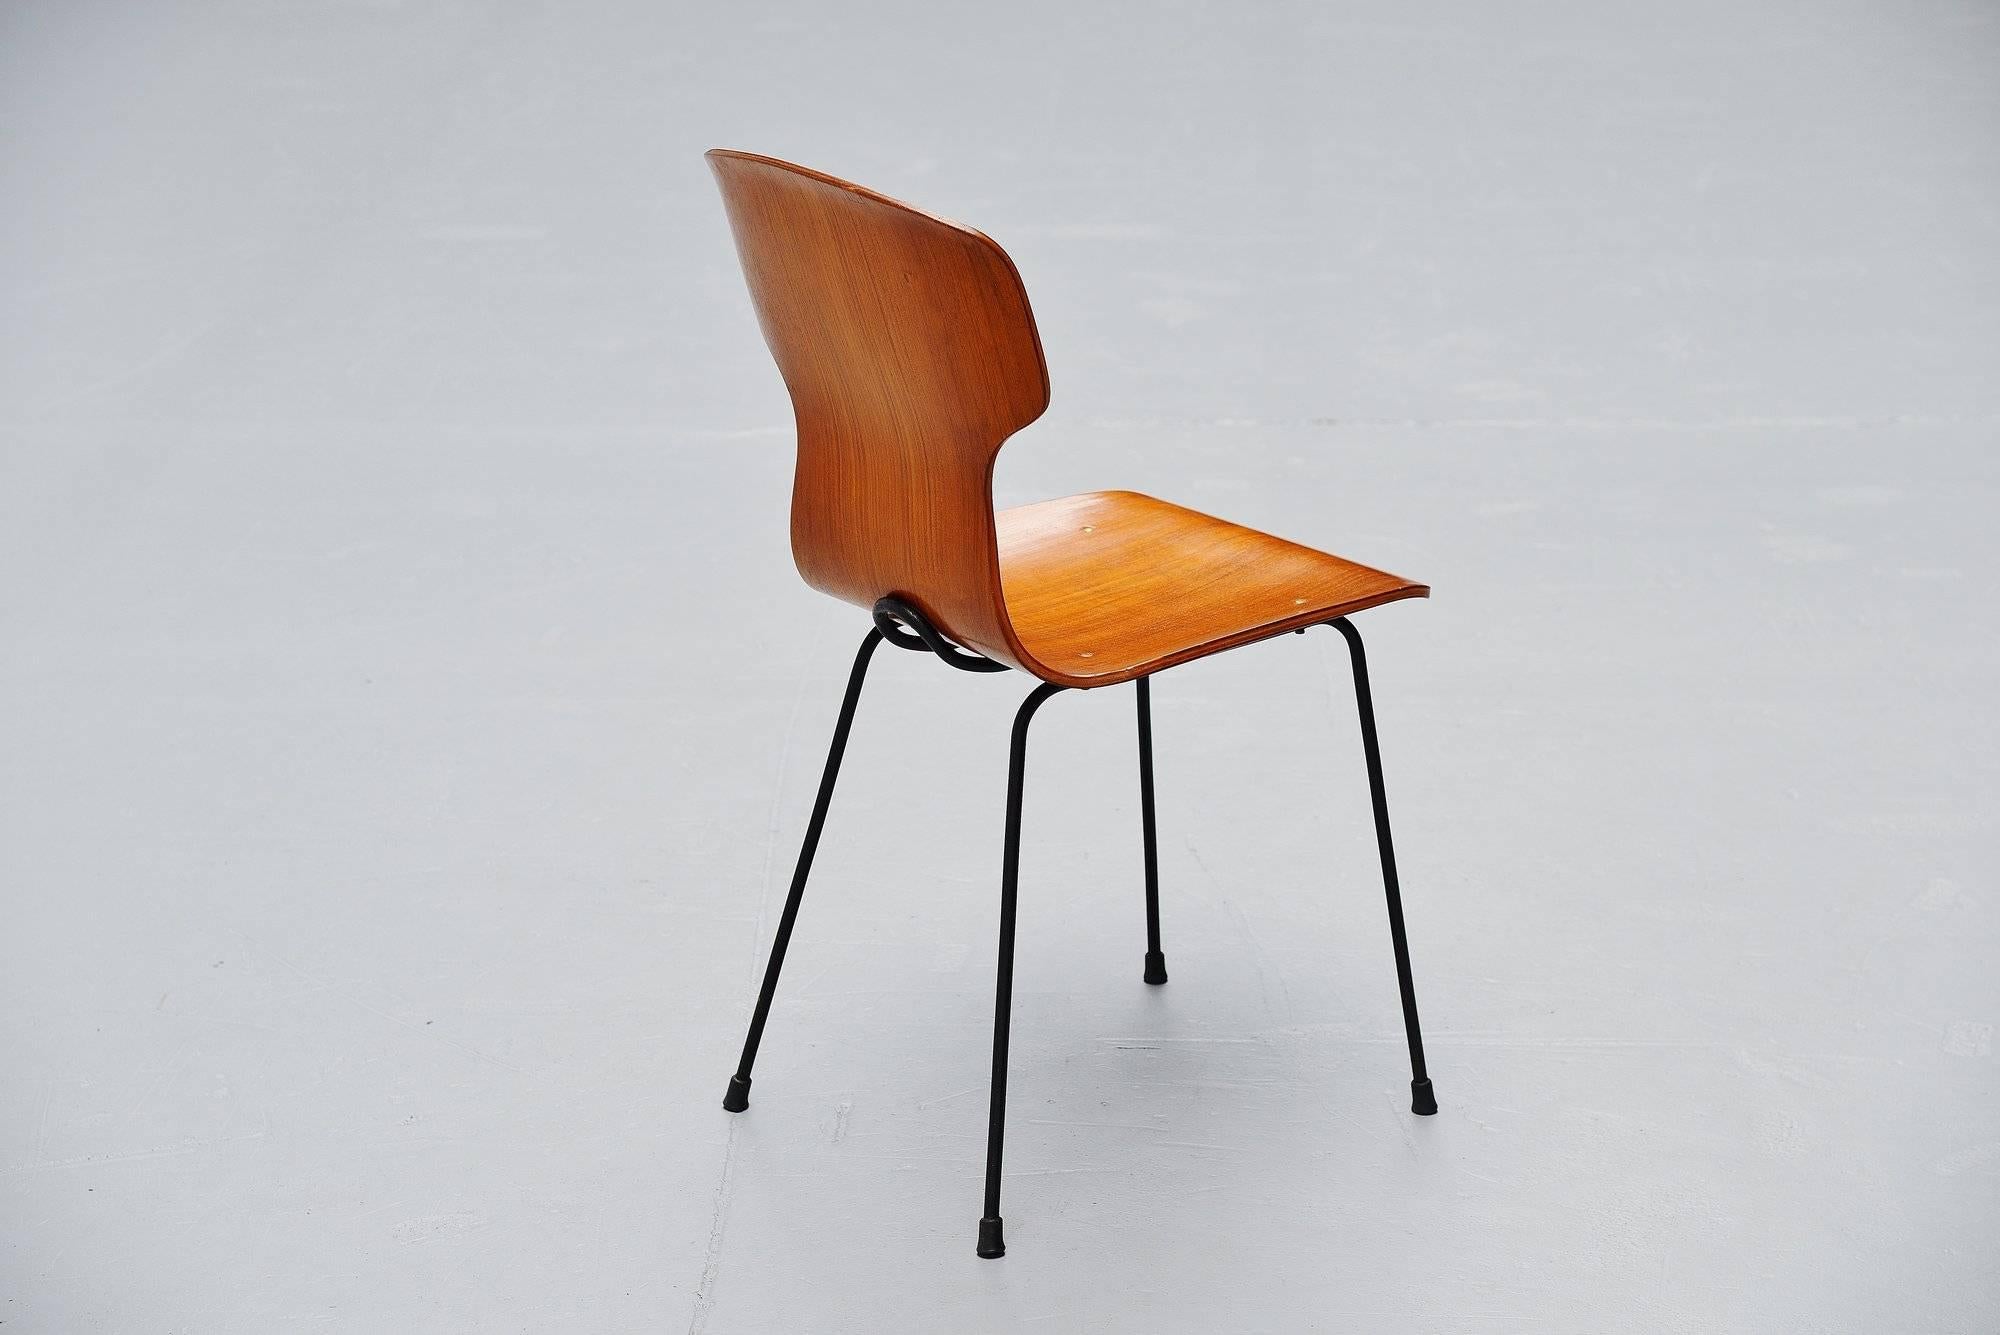 Italian plywood side chair designed by Carlo Ratti and manufactured by Legni Curva, Italy, 1950. The chair has a very nice curved shape and the plywood shell is supported by a black frame which is a very nice detail on this chair. Very nice and